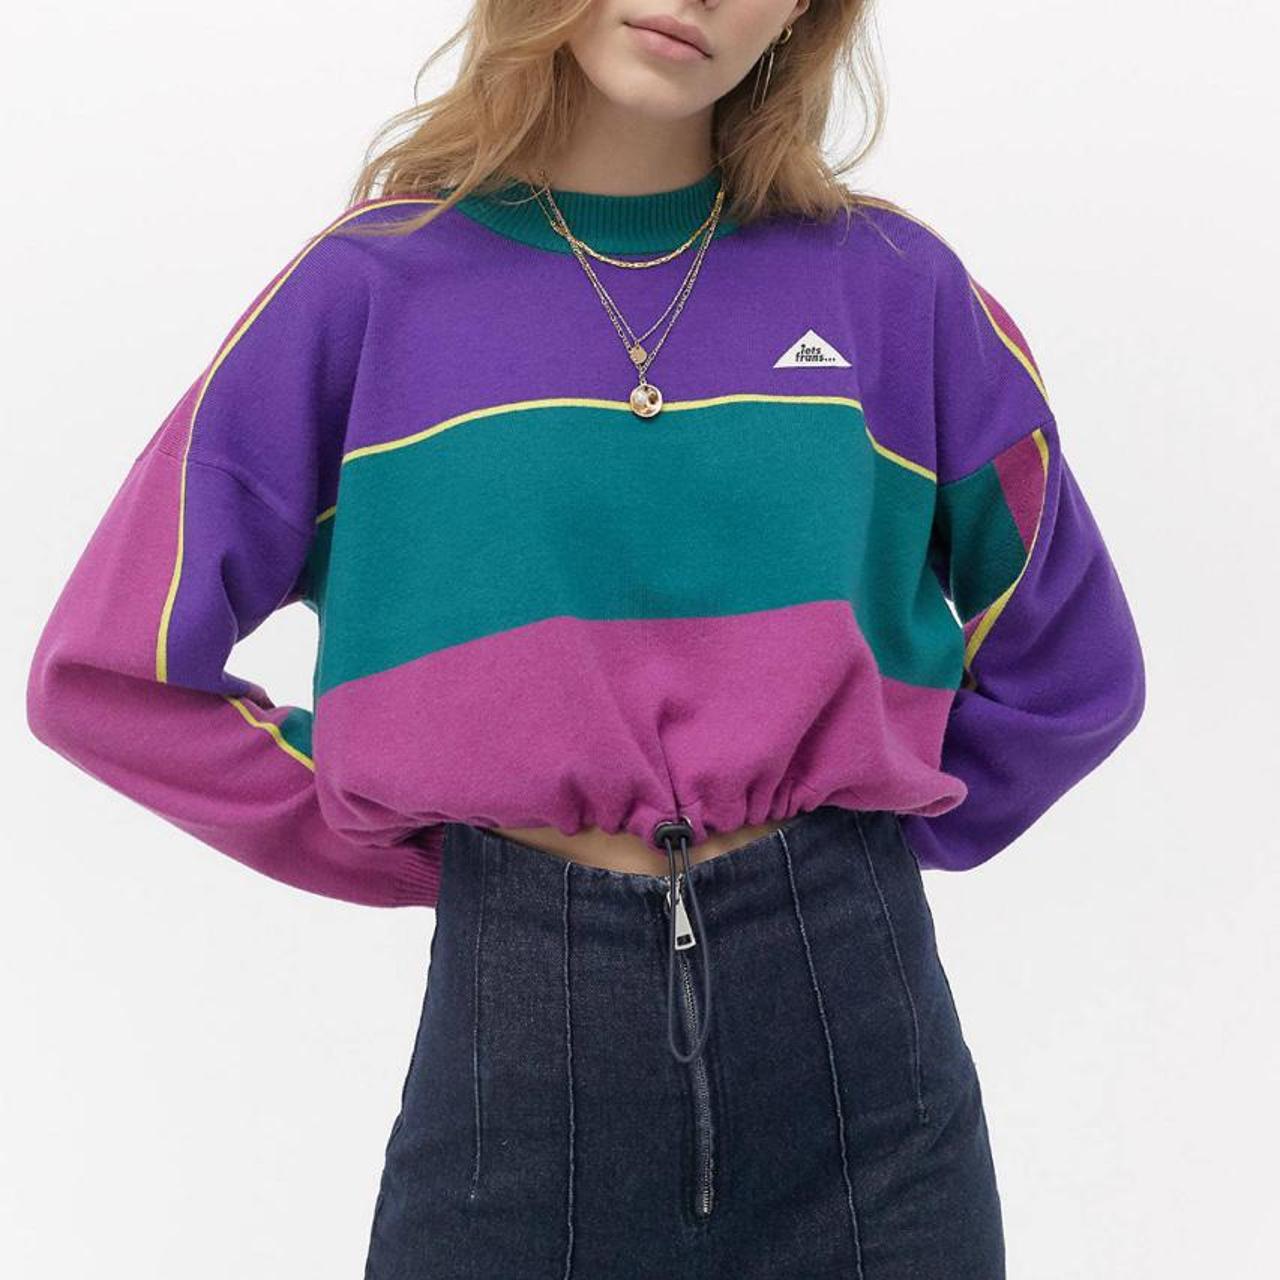 Urban Outfitters Women's Purple and Pink Sweatshirt